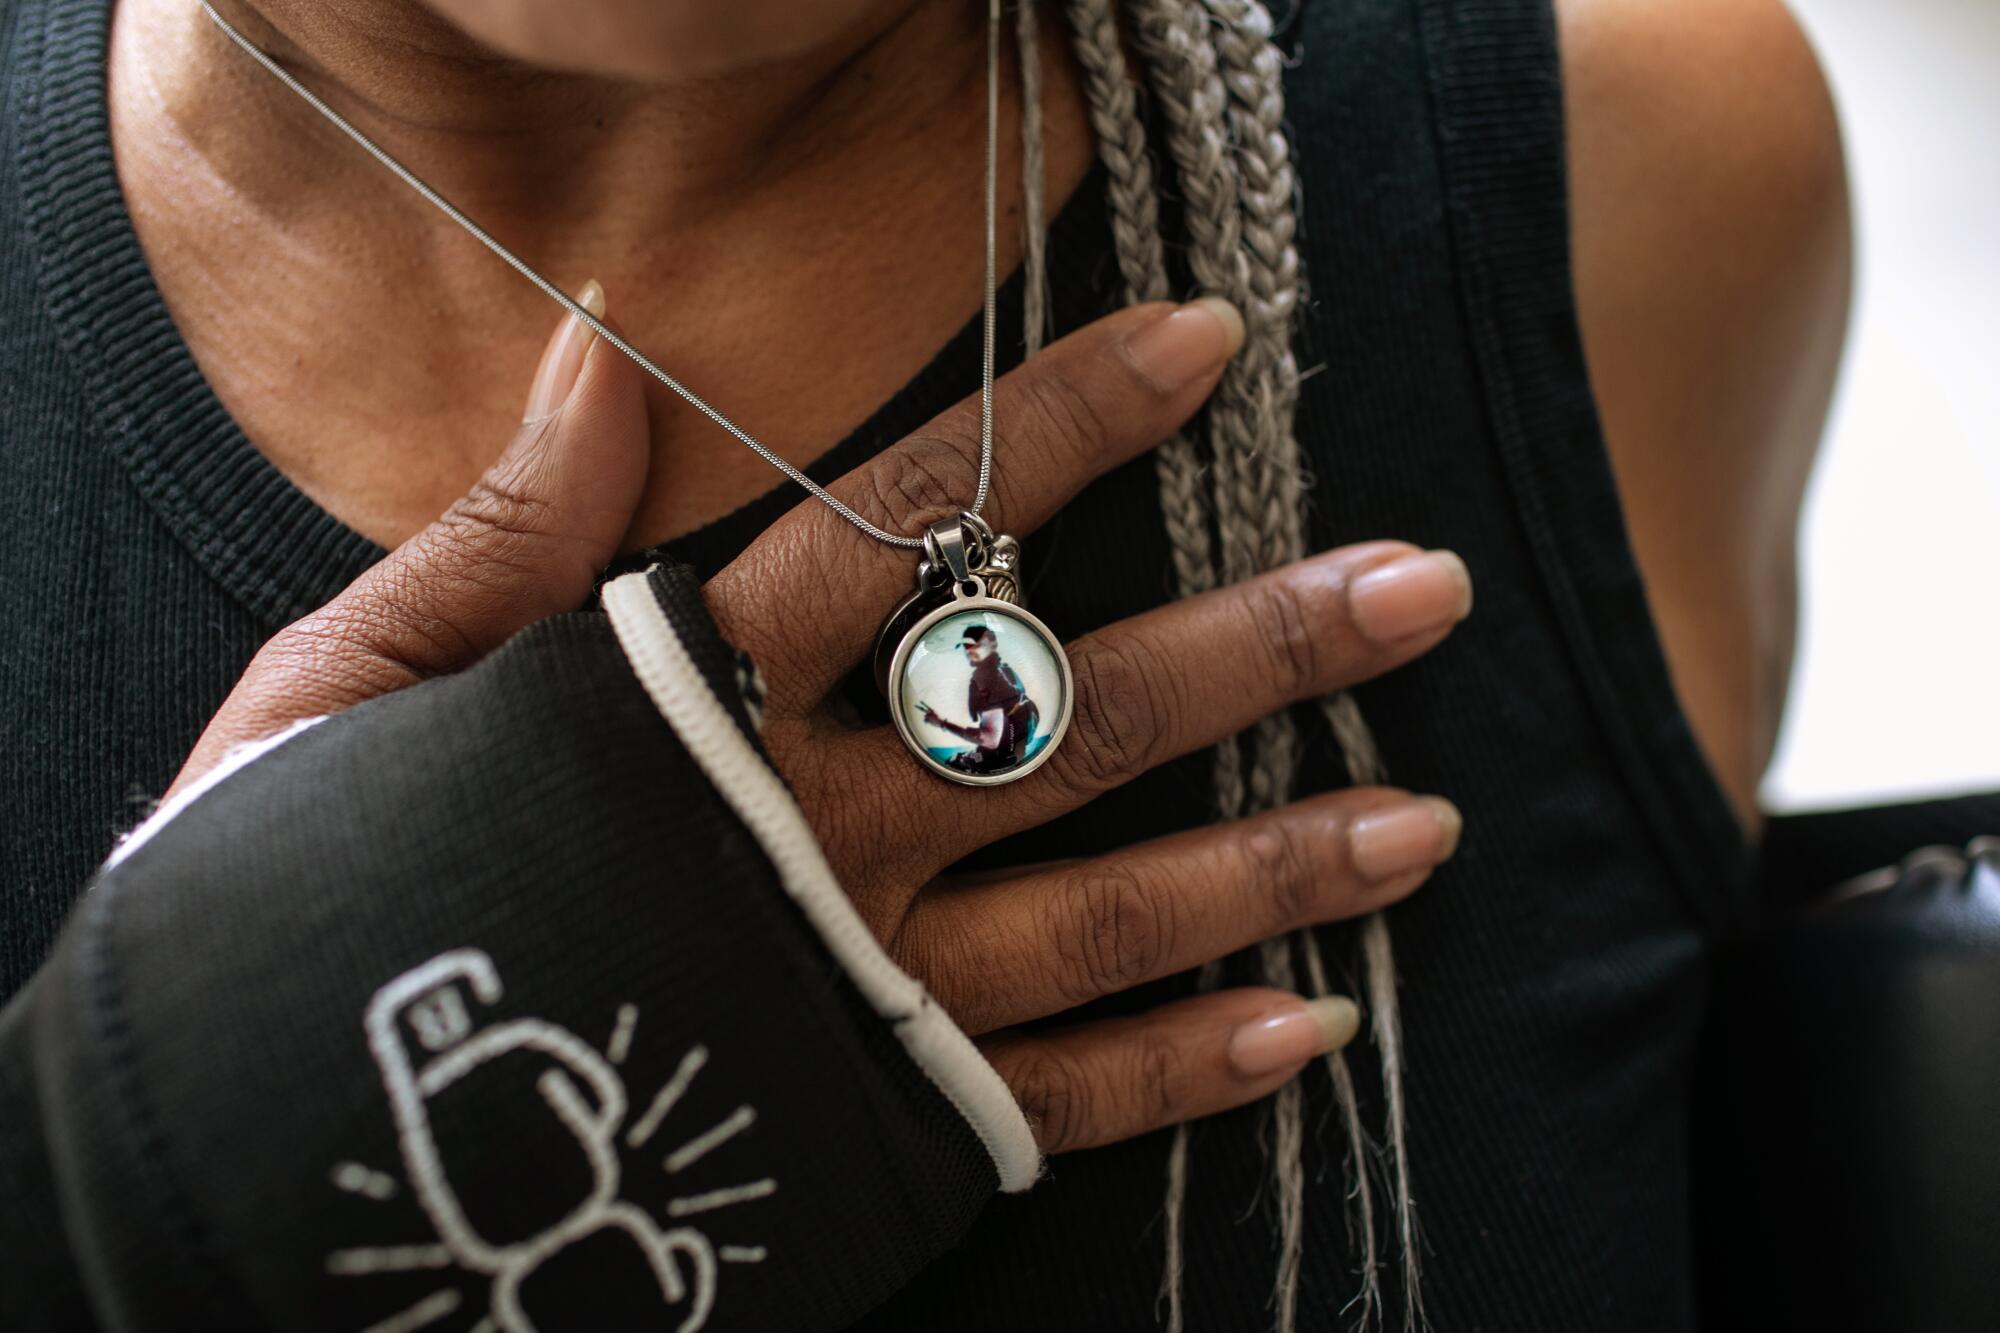 Deneen Vaughn wears a locket with a photo of her late son Chris